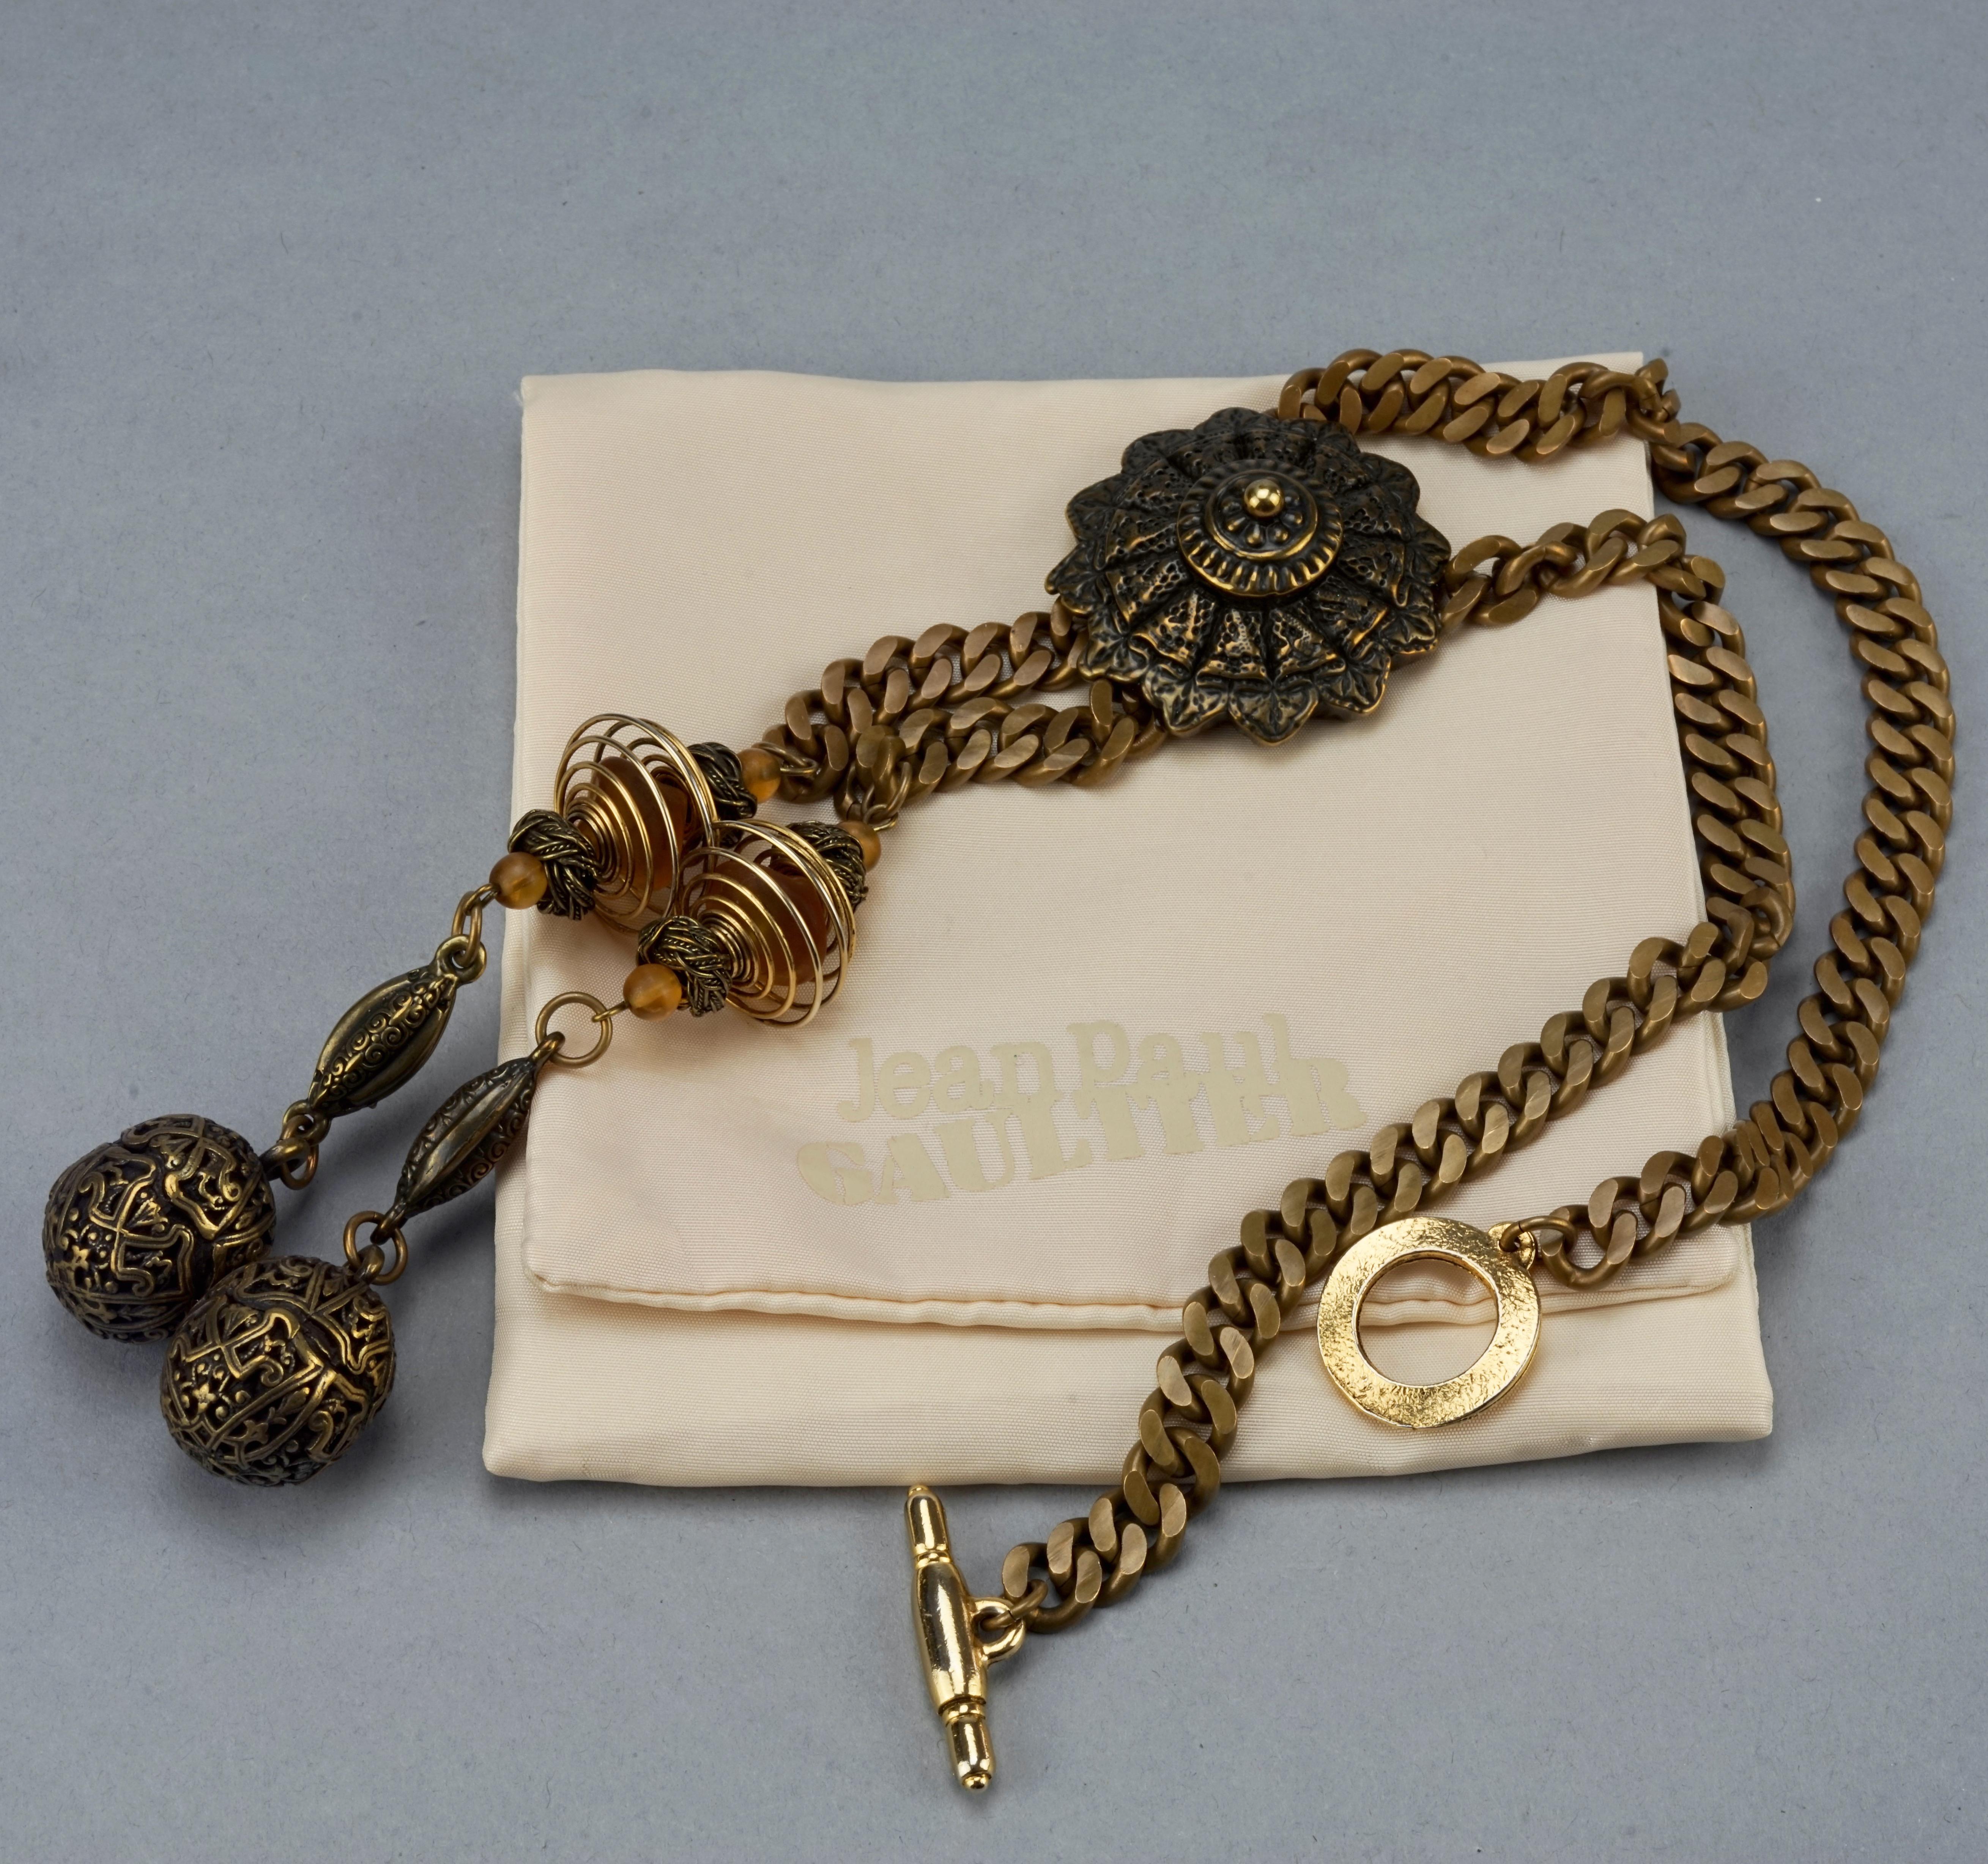 Vintage JEAN PAUL GAULTIER Brutalist Tribal Coil Charm Necklace In Excellent Condition For Sale In Kingersheim, Alsace